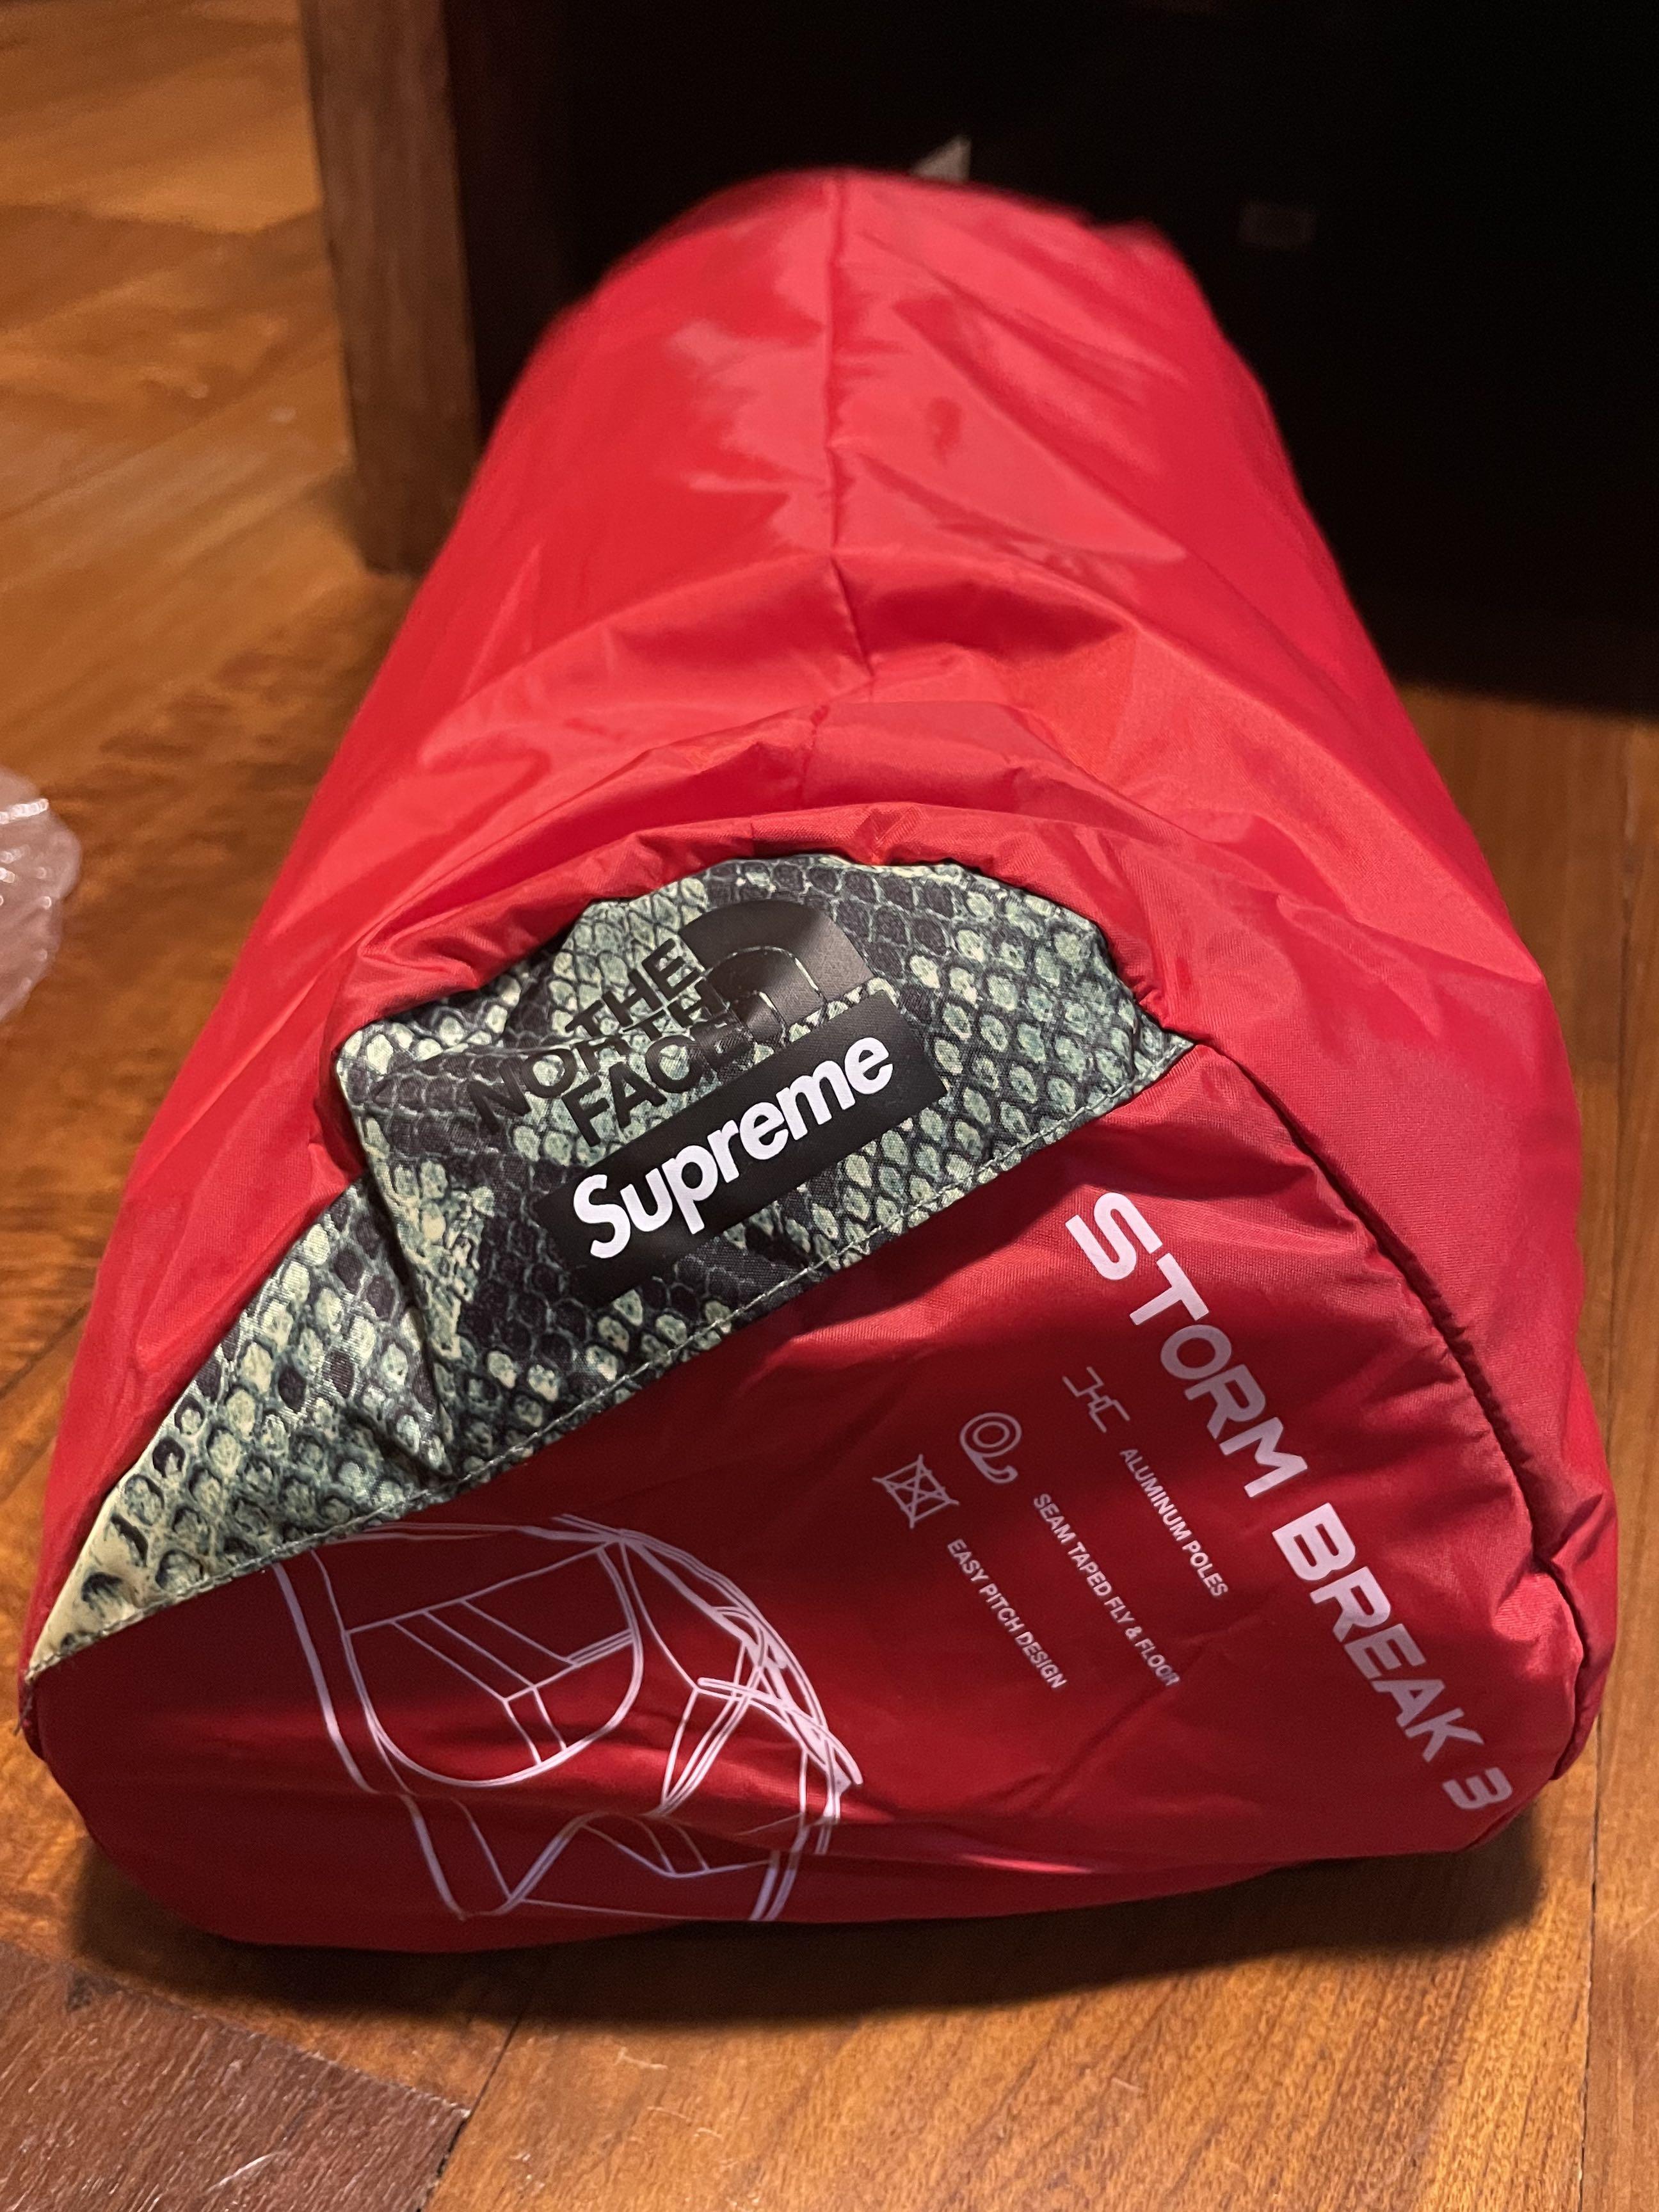 Supreme /The North Face Snakeskin Taped Seam Stormbreak 3 Tent